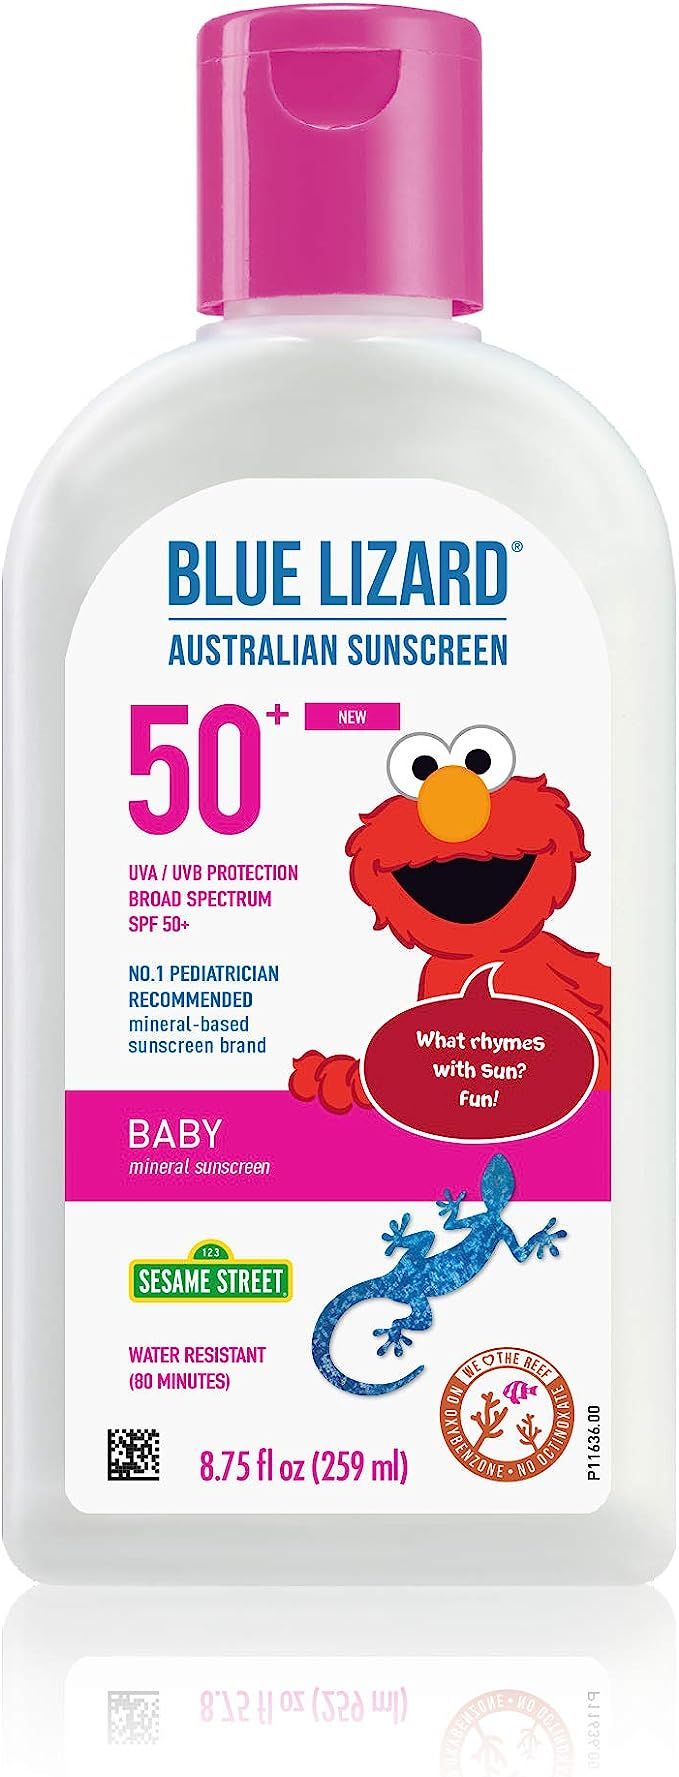 BLUE LIZARD Baby Mineral Sunscreen with Zinc Oxide, SPF 50+, Water Resistant, UVA/UVB Protection ... | Amazon (US)